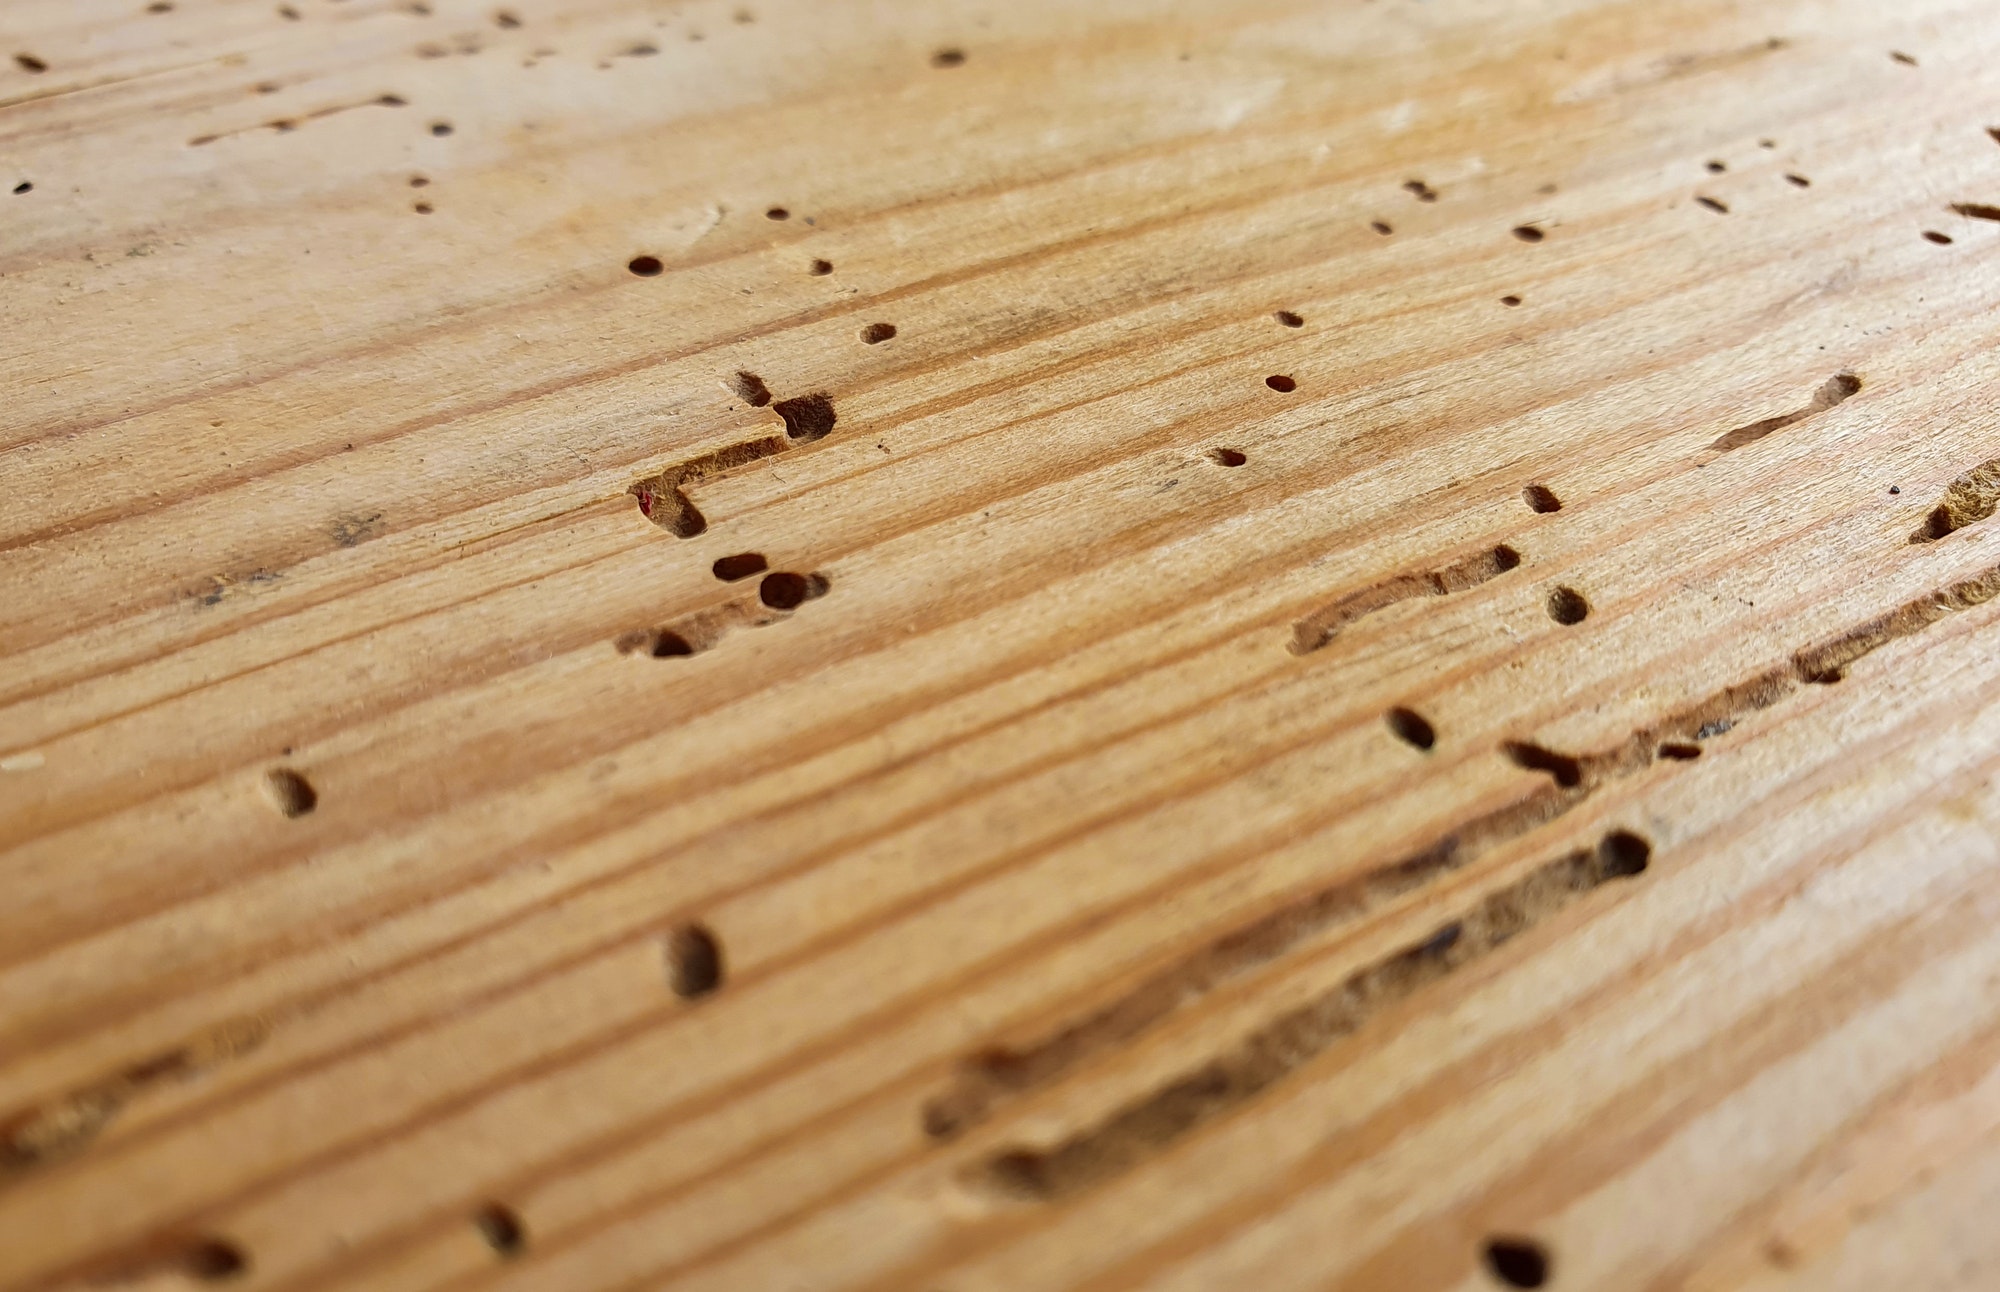 a board with insect holes